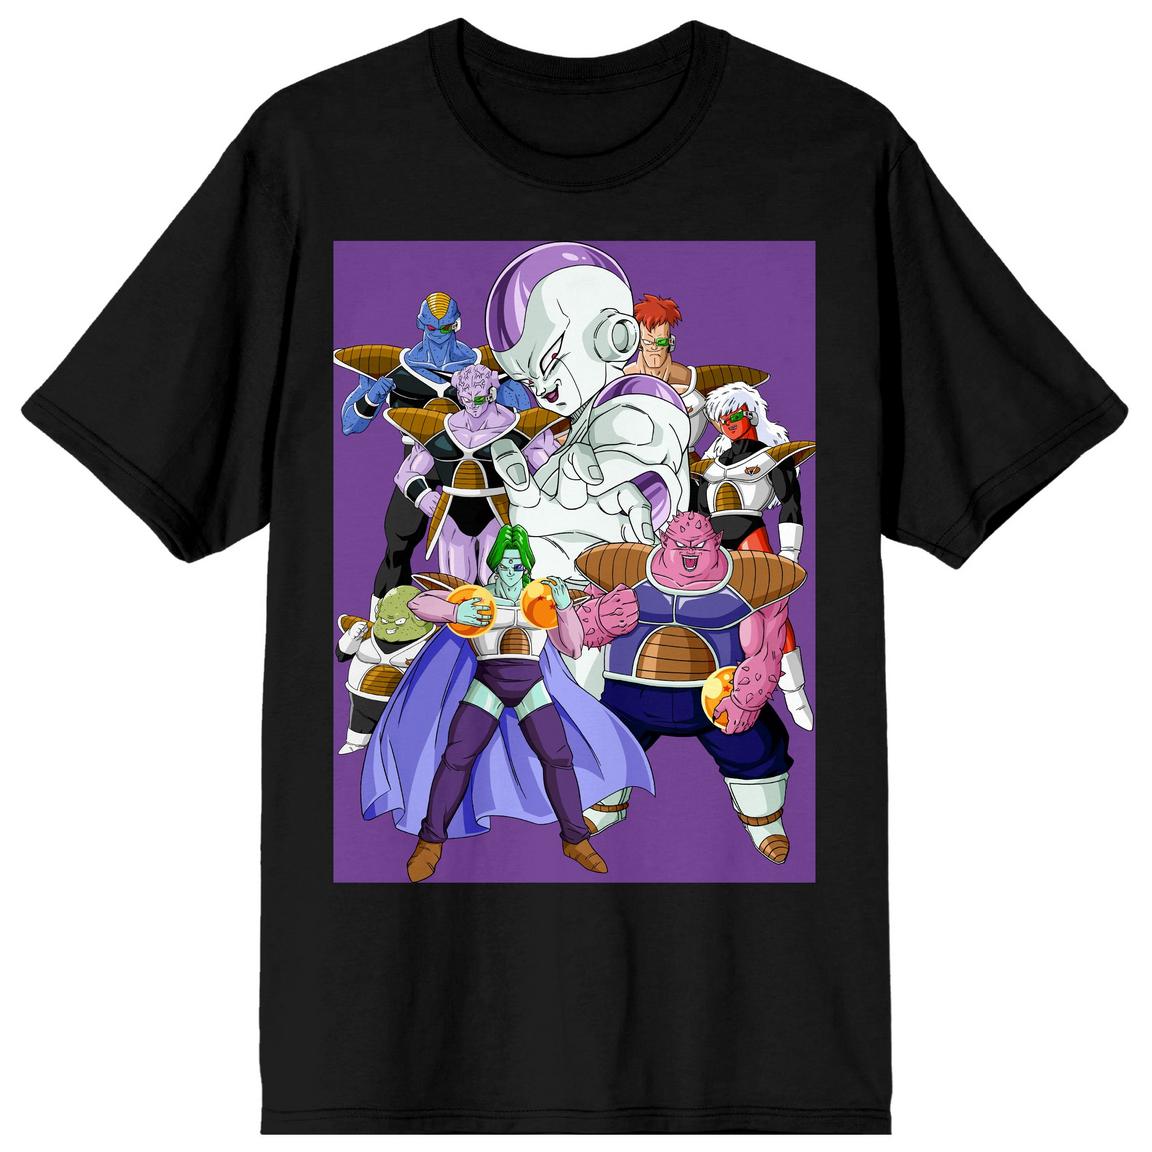 Dragon Ball Z Anime Frieza and Disciples Characters Men's Black Short Sleeve T-Shirt, Size: Large, Bioworld Merchandising